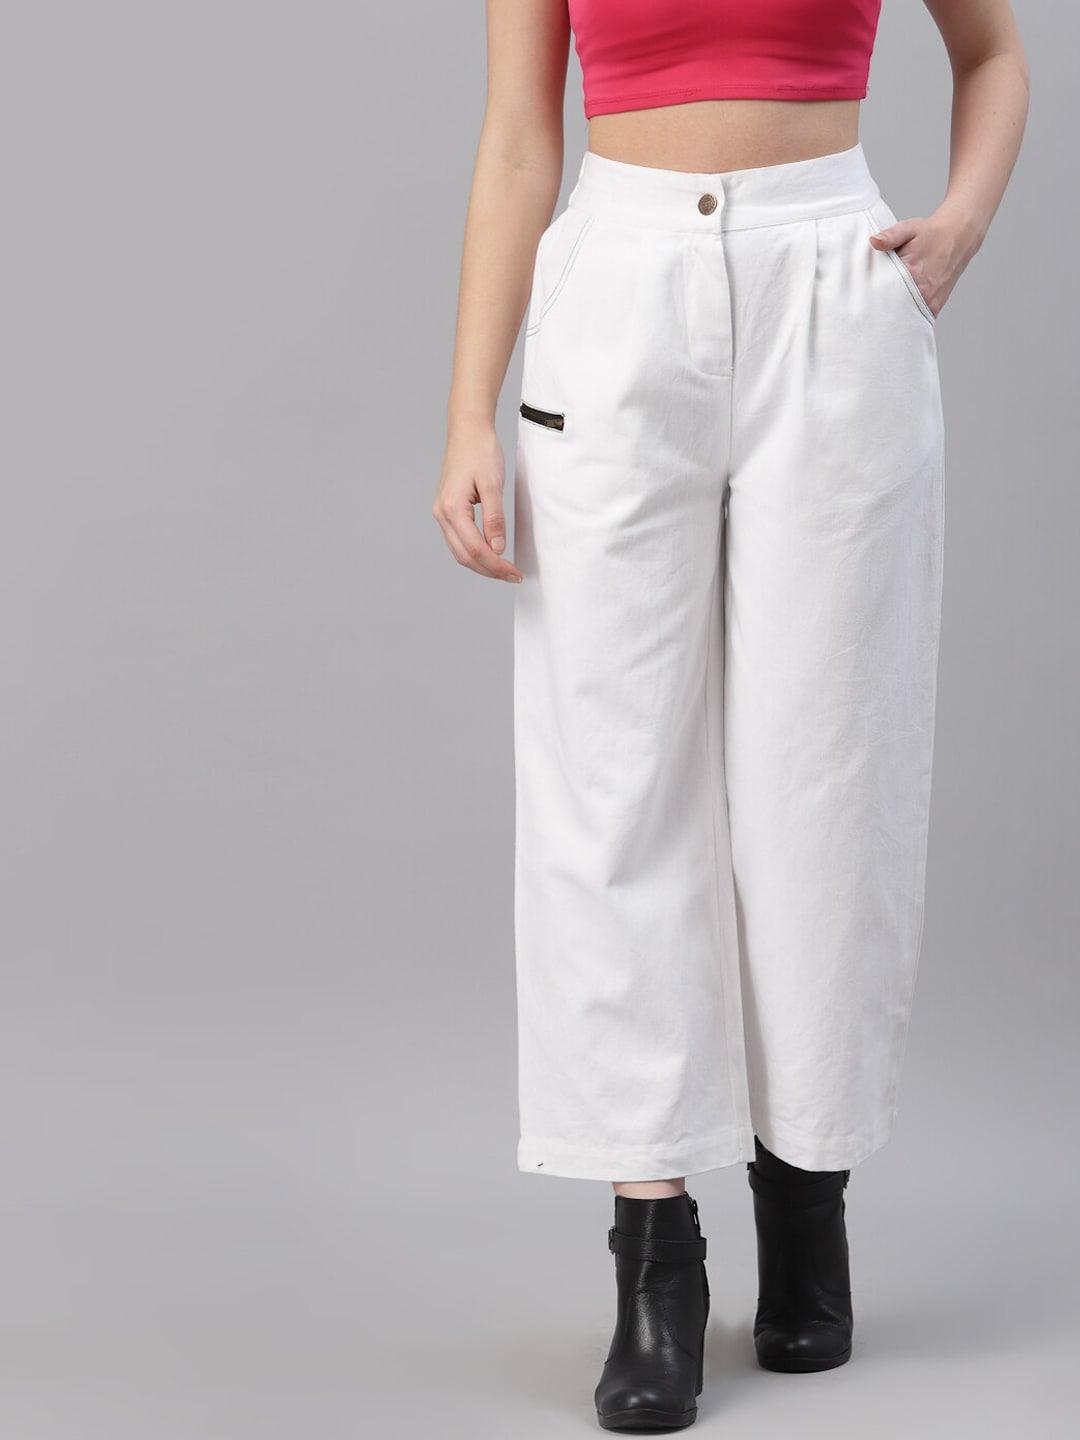 NEUDIS Women Pleated Mid Rise Cotton Parallel Trousers